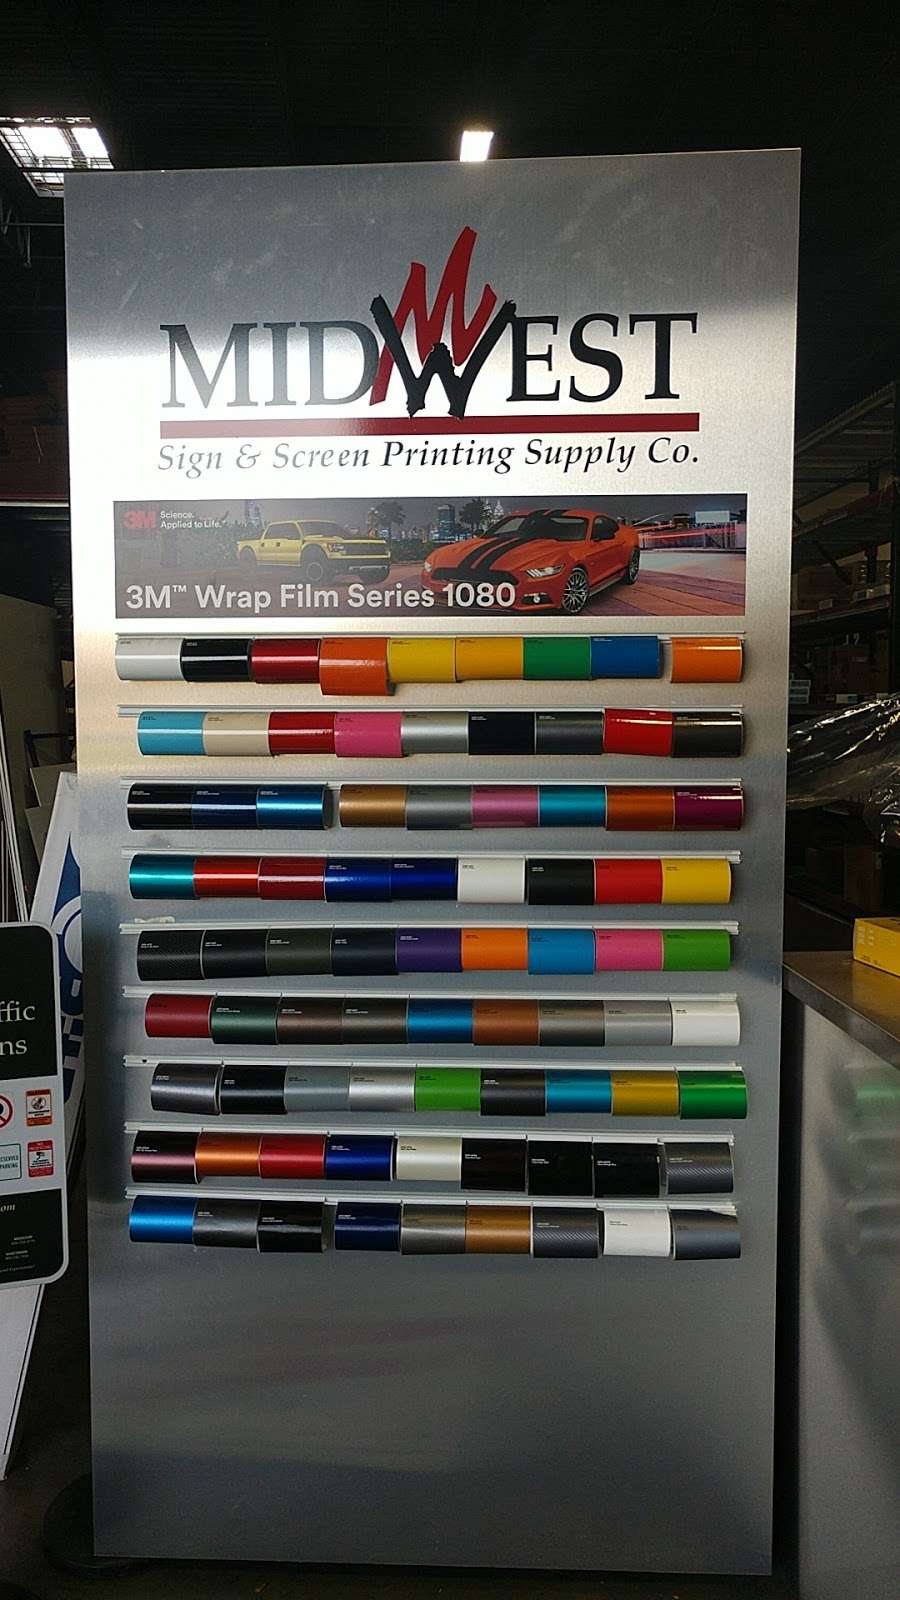 Midwest Sign & Screen Printing Supply Co. | 5301 Peoria St # F, Denver, CO 80239 | Phone: (303) 373-9800